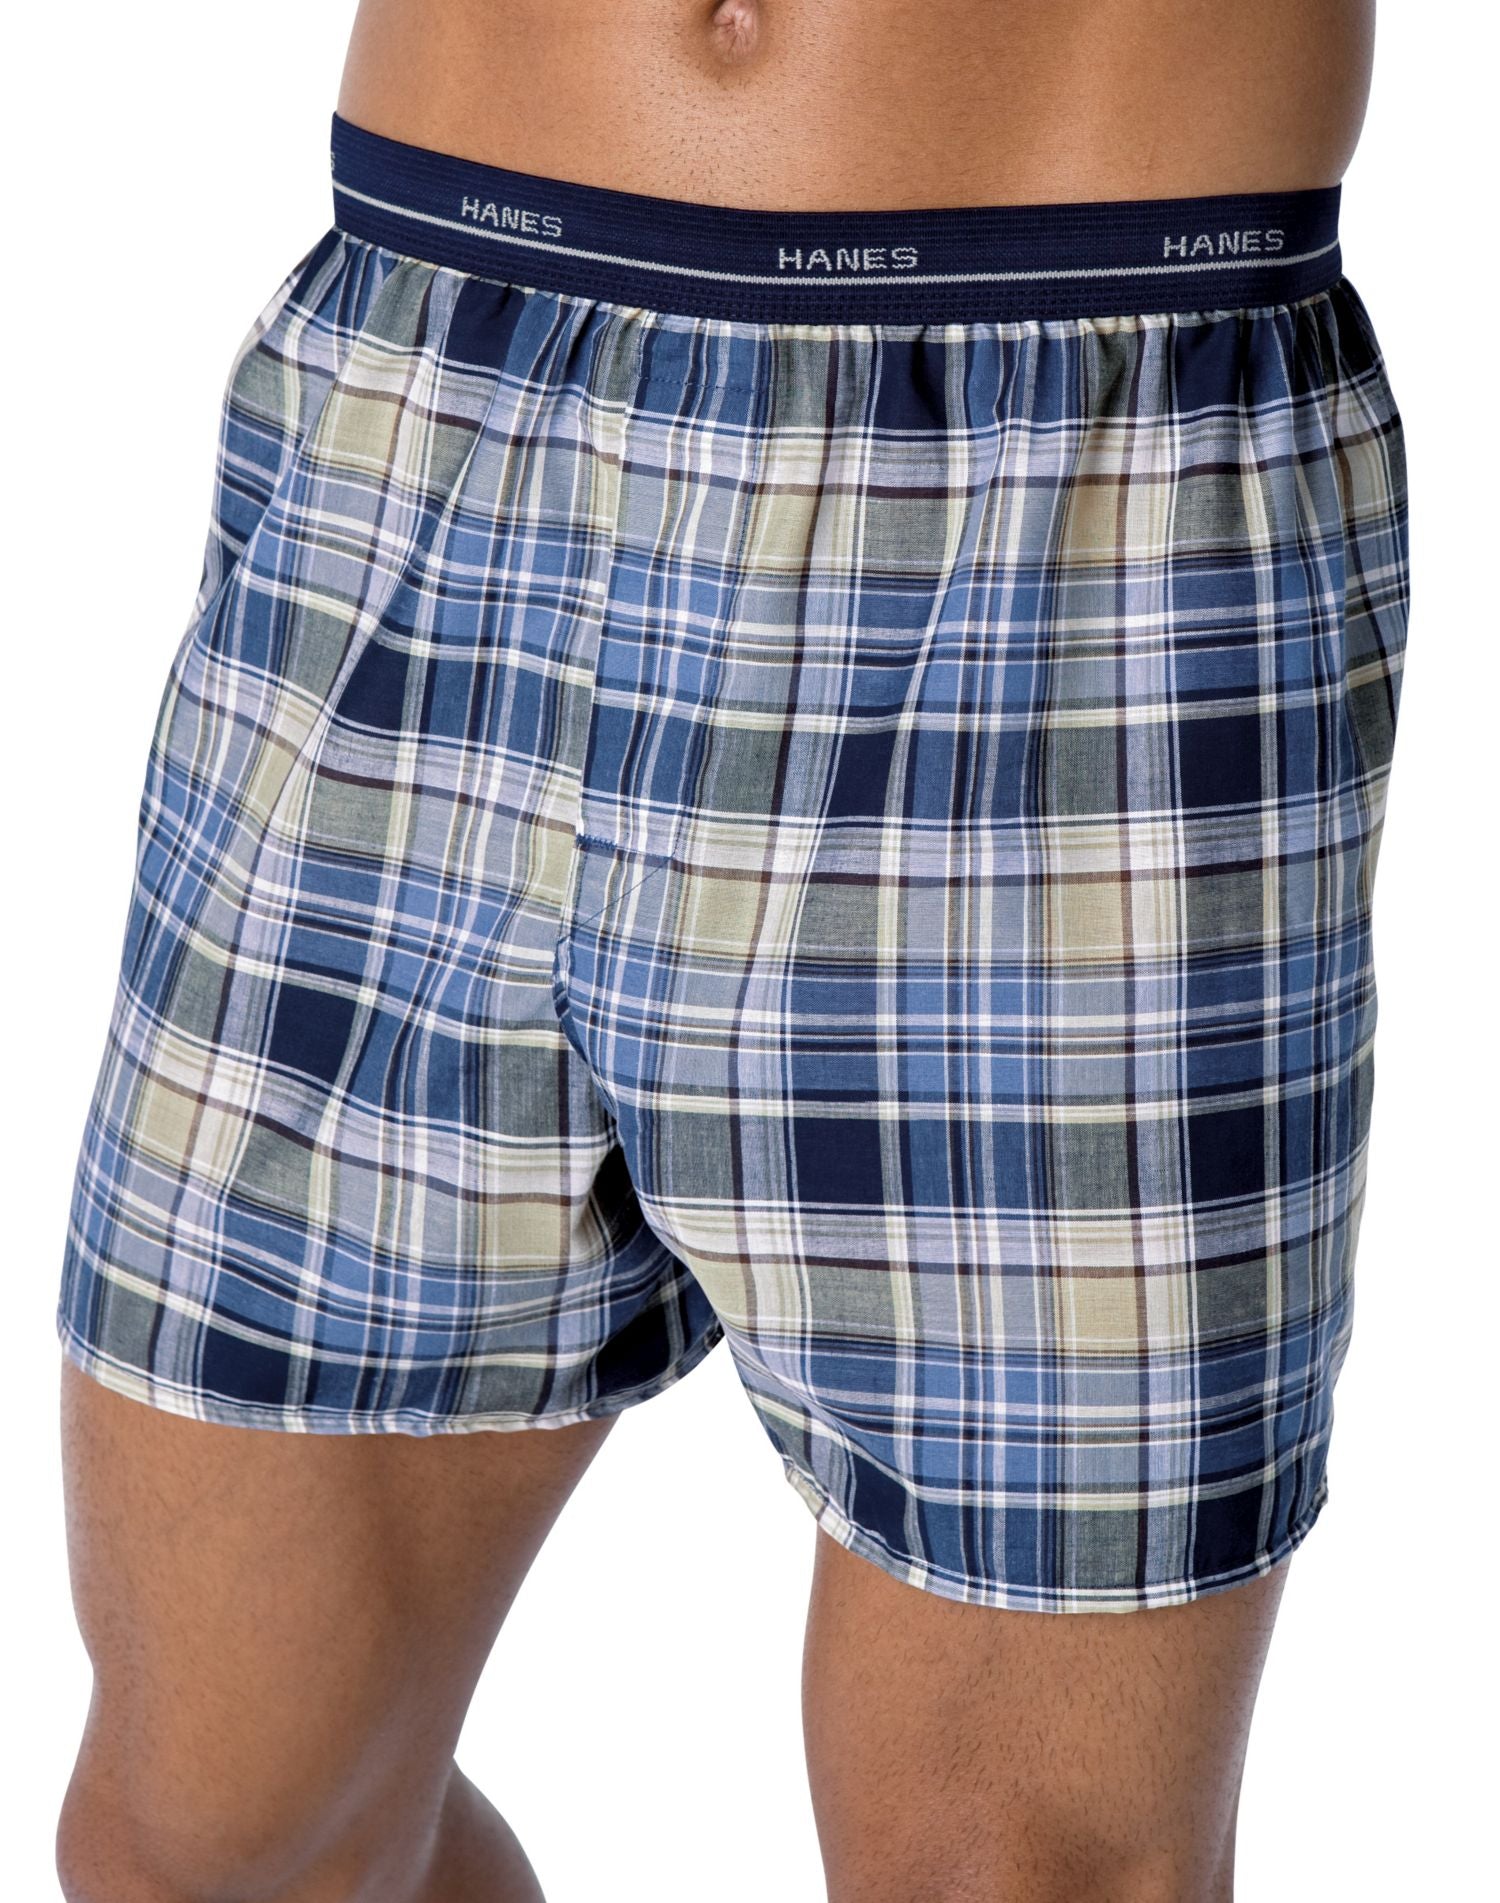 MWCST - Hanes Men's Plaid Woven Boxers with Comfort Flex® Waistband 3 Pack